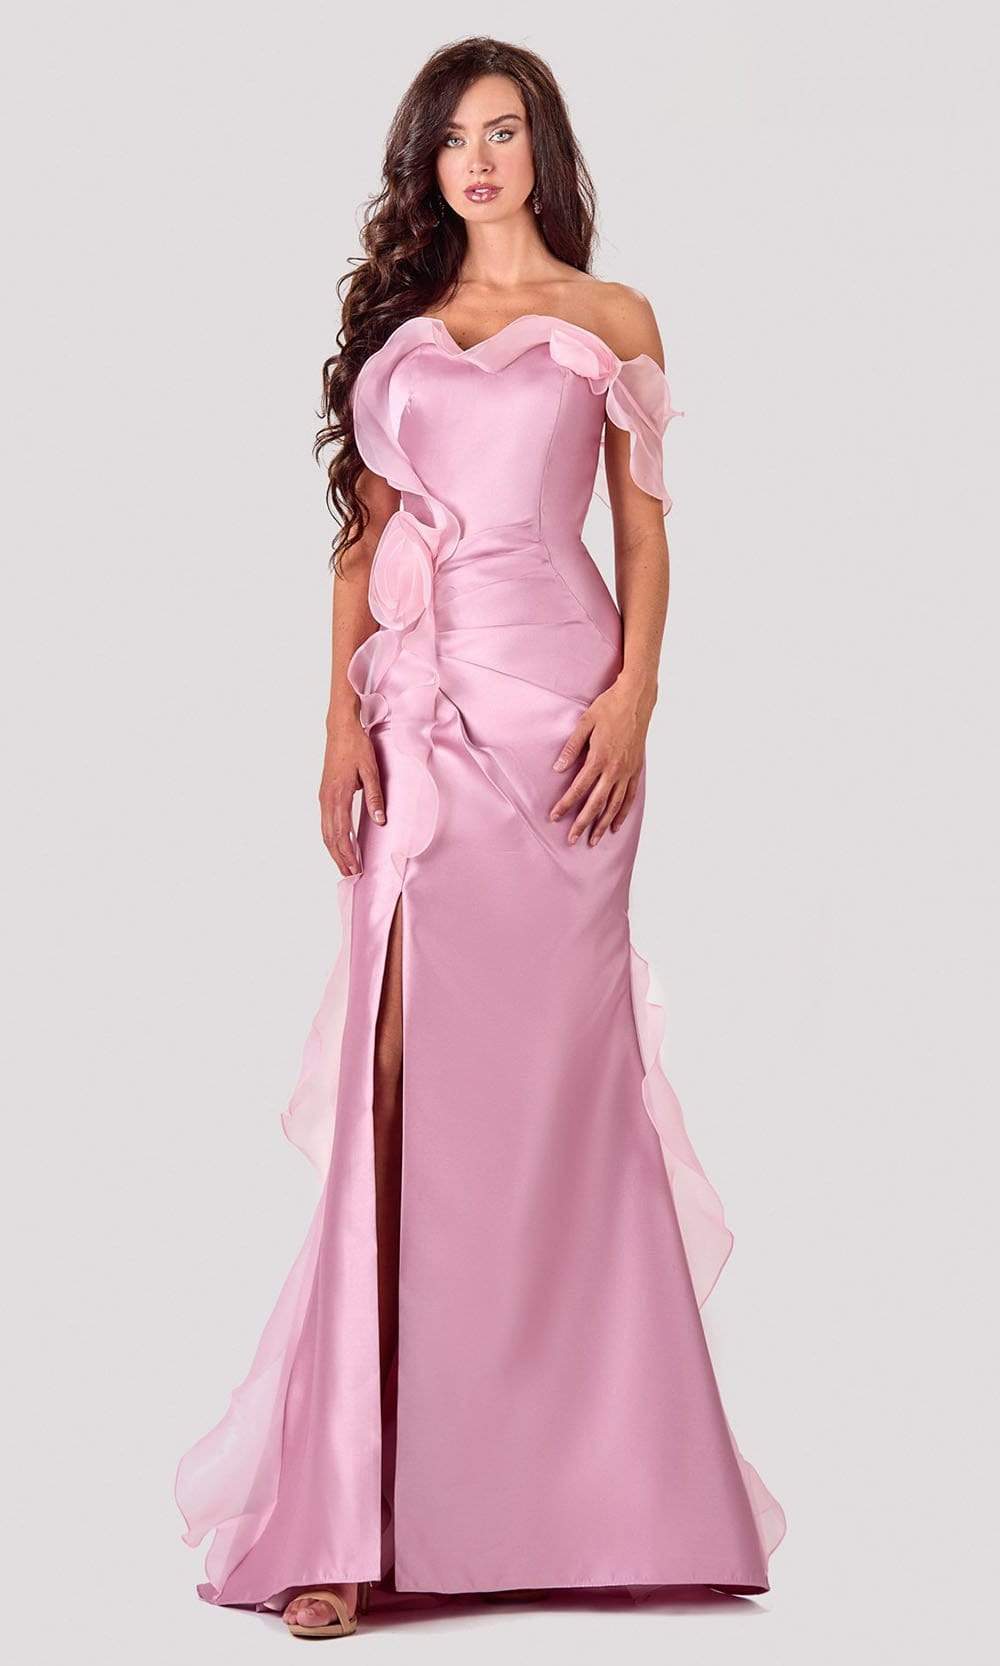 Terani Couture - 2111E4743 Strapless Floral Frill Slit Mermaid Gown Evening Dresses 00 / Peony